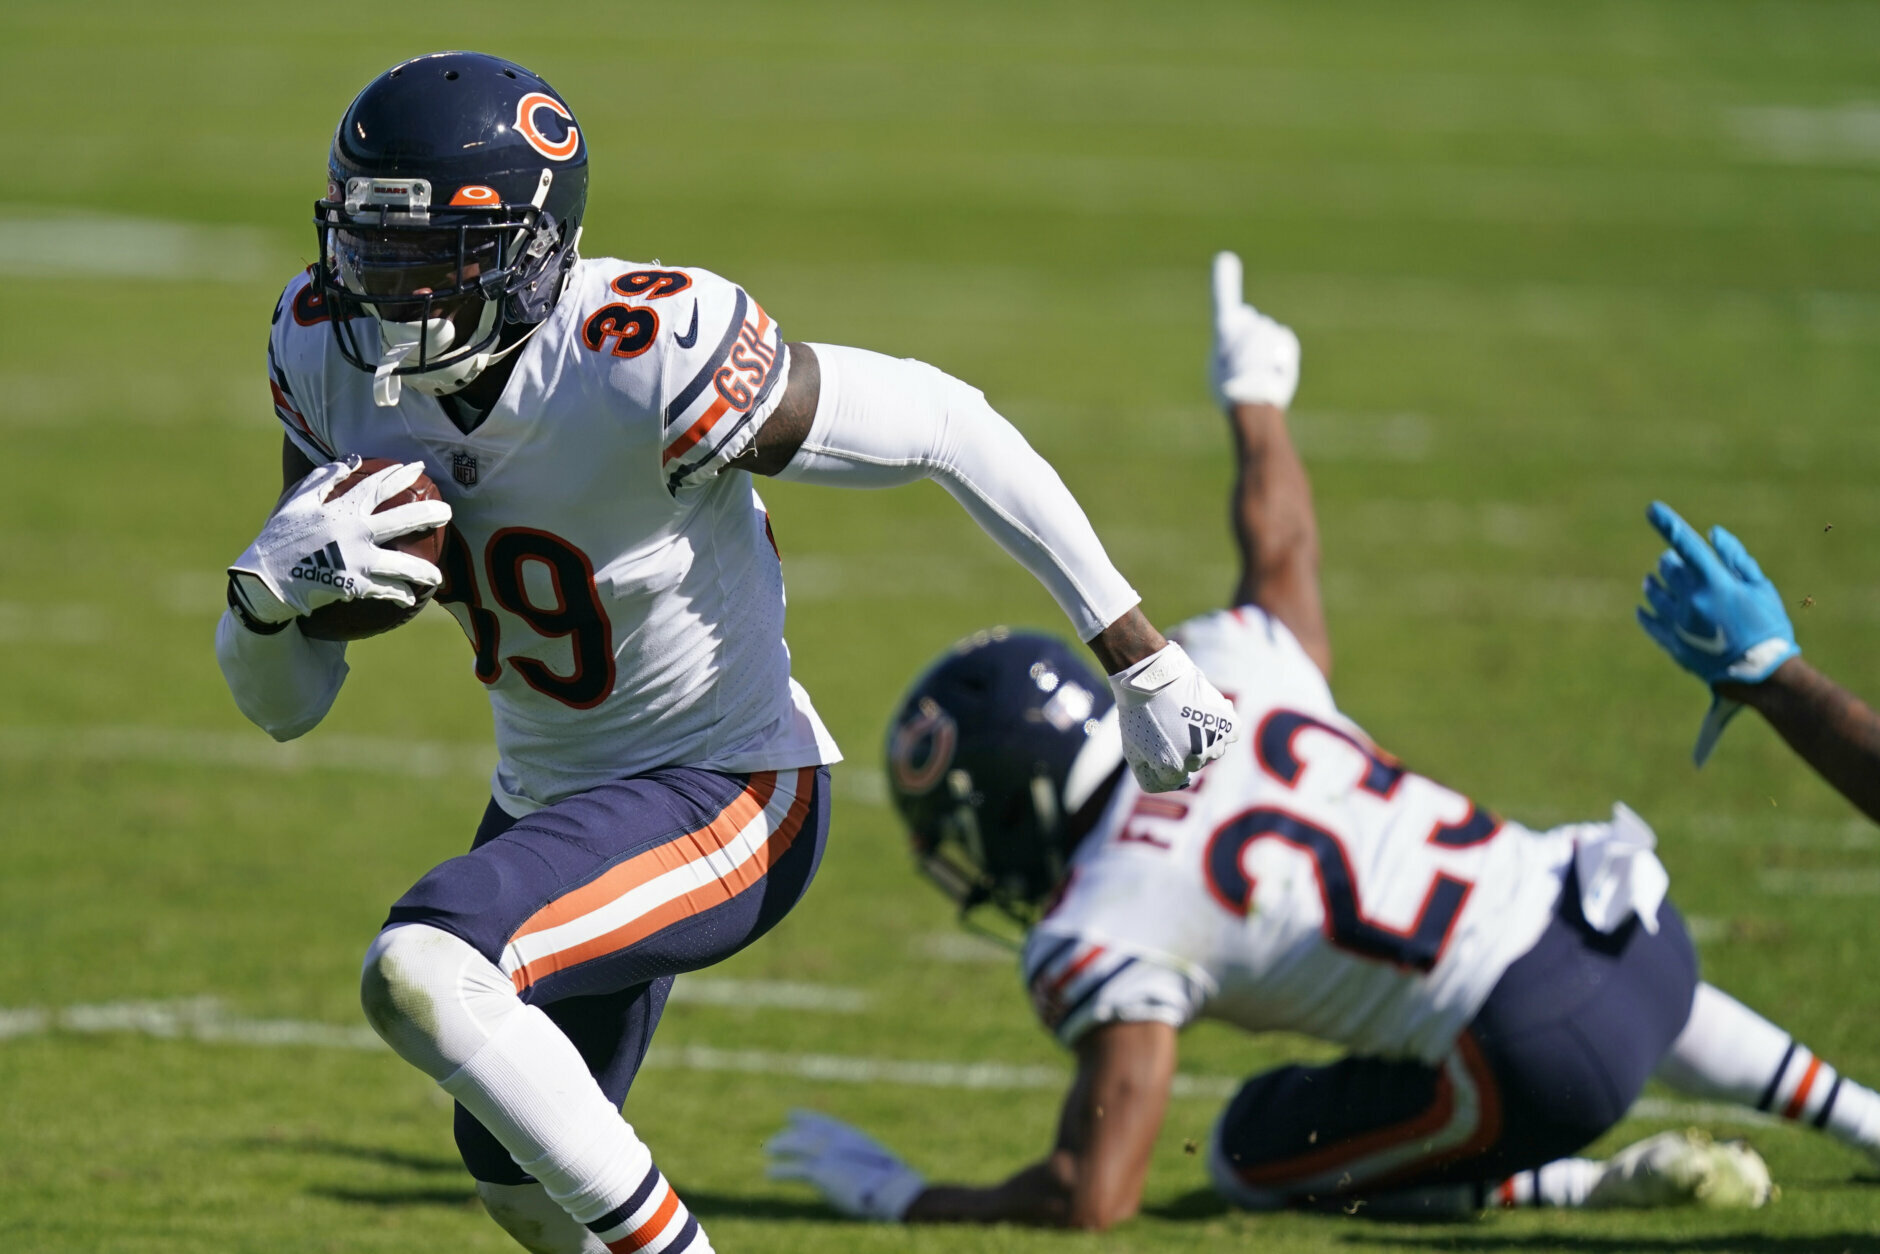 <p><b><i>Bears 23</i></b><br />
<b><i>Panthers 16</i></b></p>
<p>Chicago starting 5-1 has to be one of the most unbelievable developments of the first half of the NFL season. If the Bears win any of their next three games (at Rams, Saints, at Titans) they&#8217;re almost certainly a playoff team — whether or not they actually look like one.</p>
